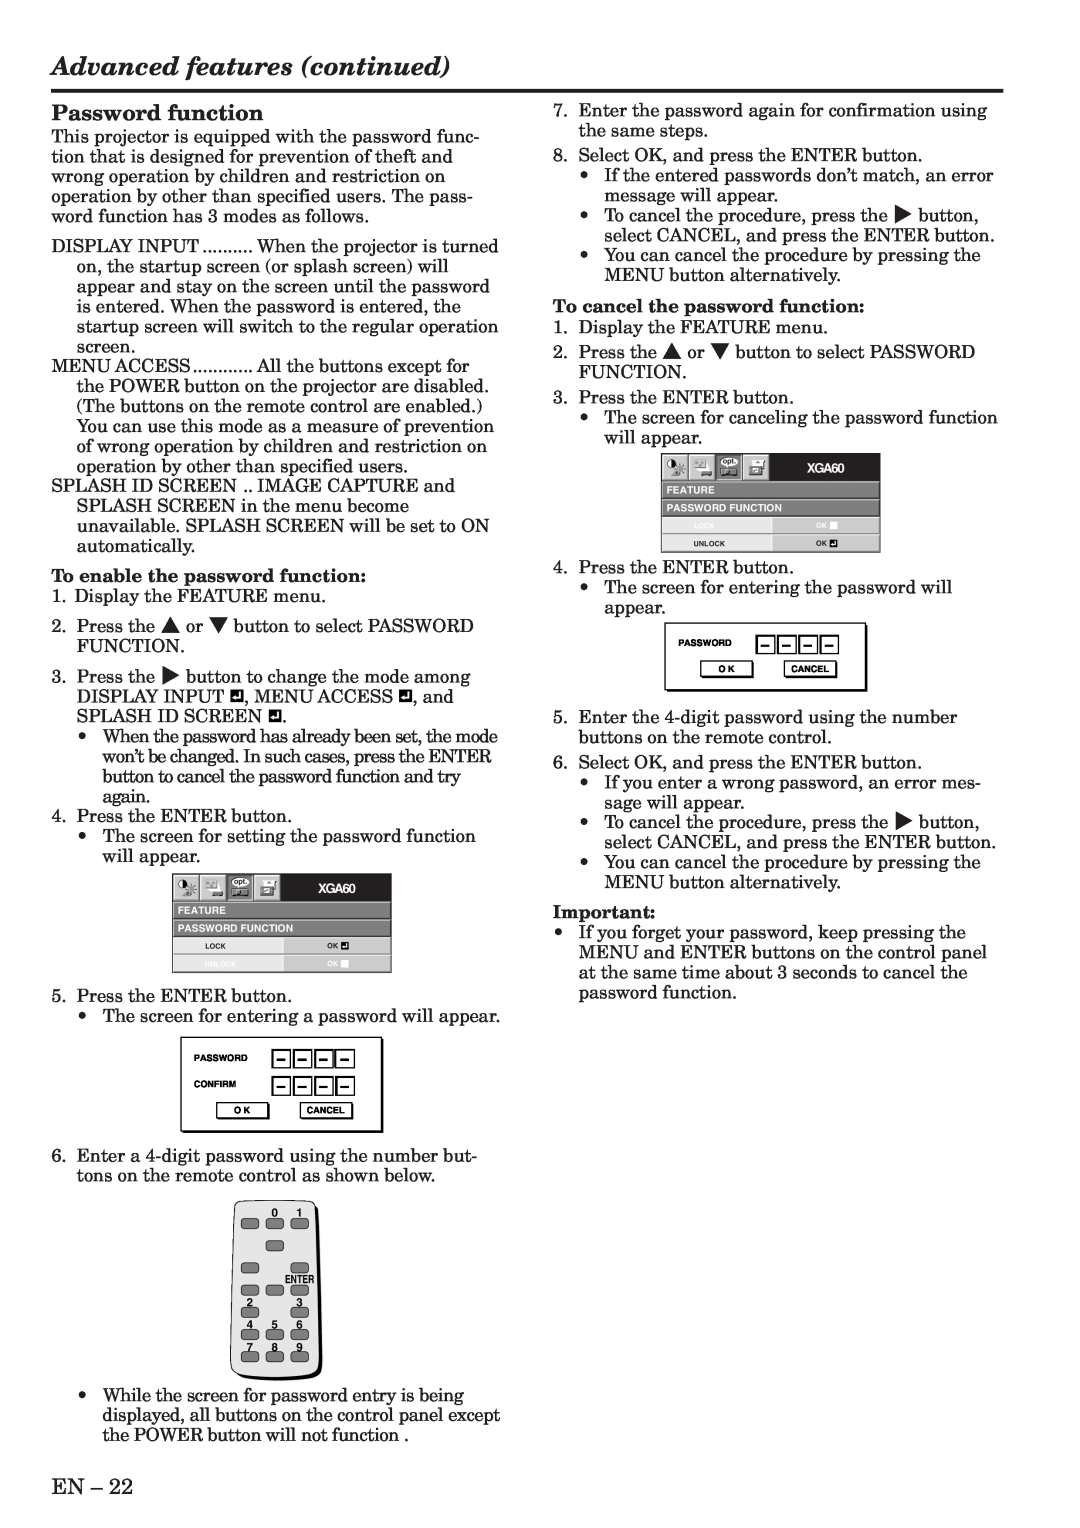 Mitsubishi Electronics XL6U user manual Advanced features continued, Password function 